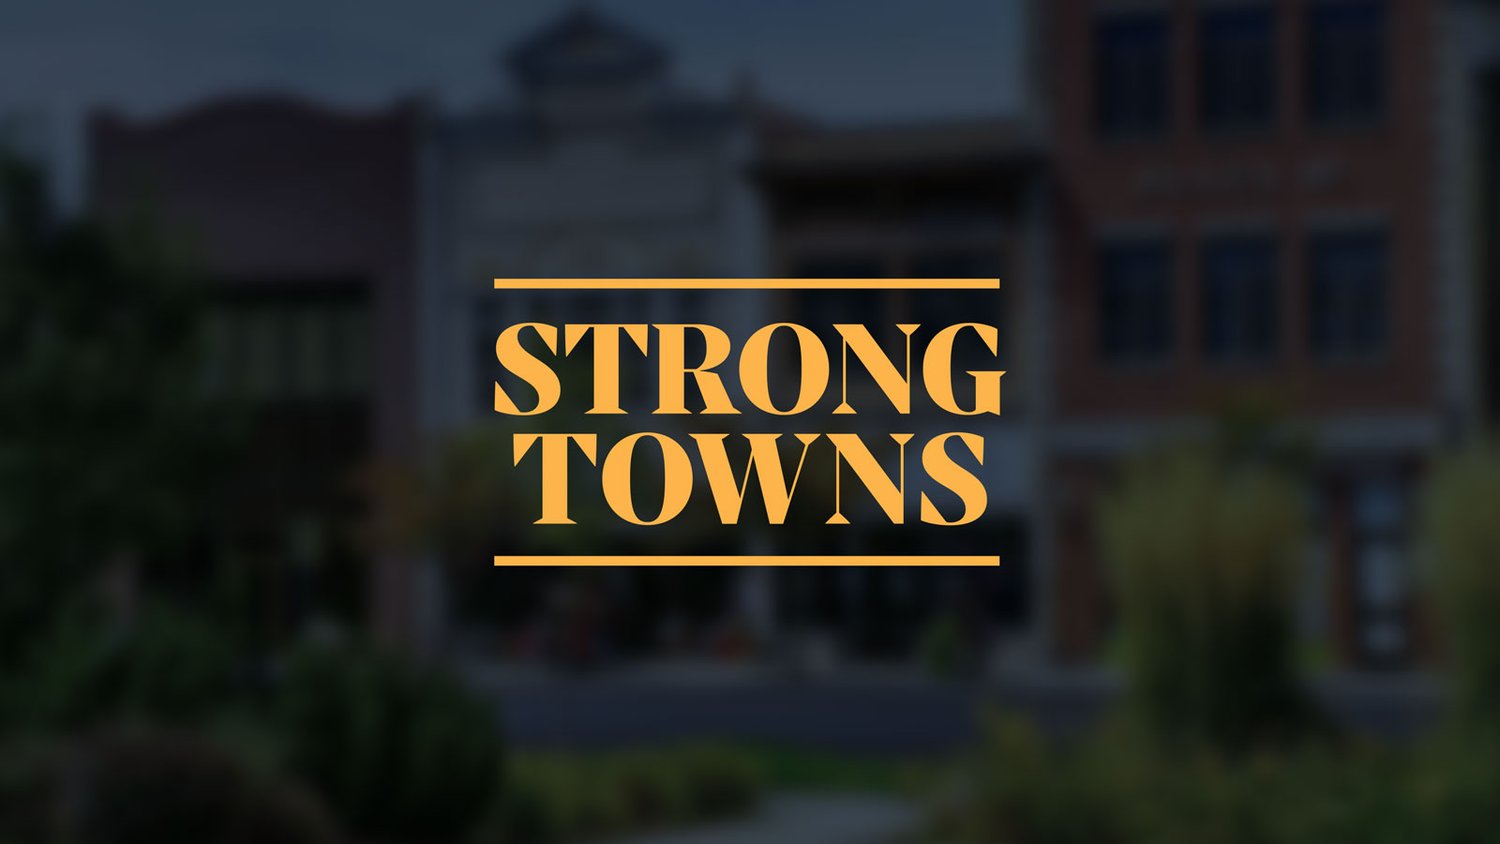 www.strongtowns.org